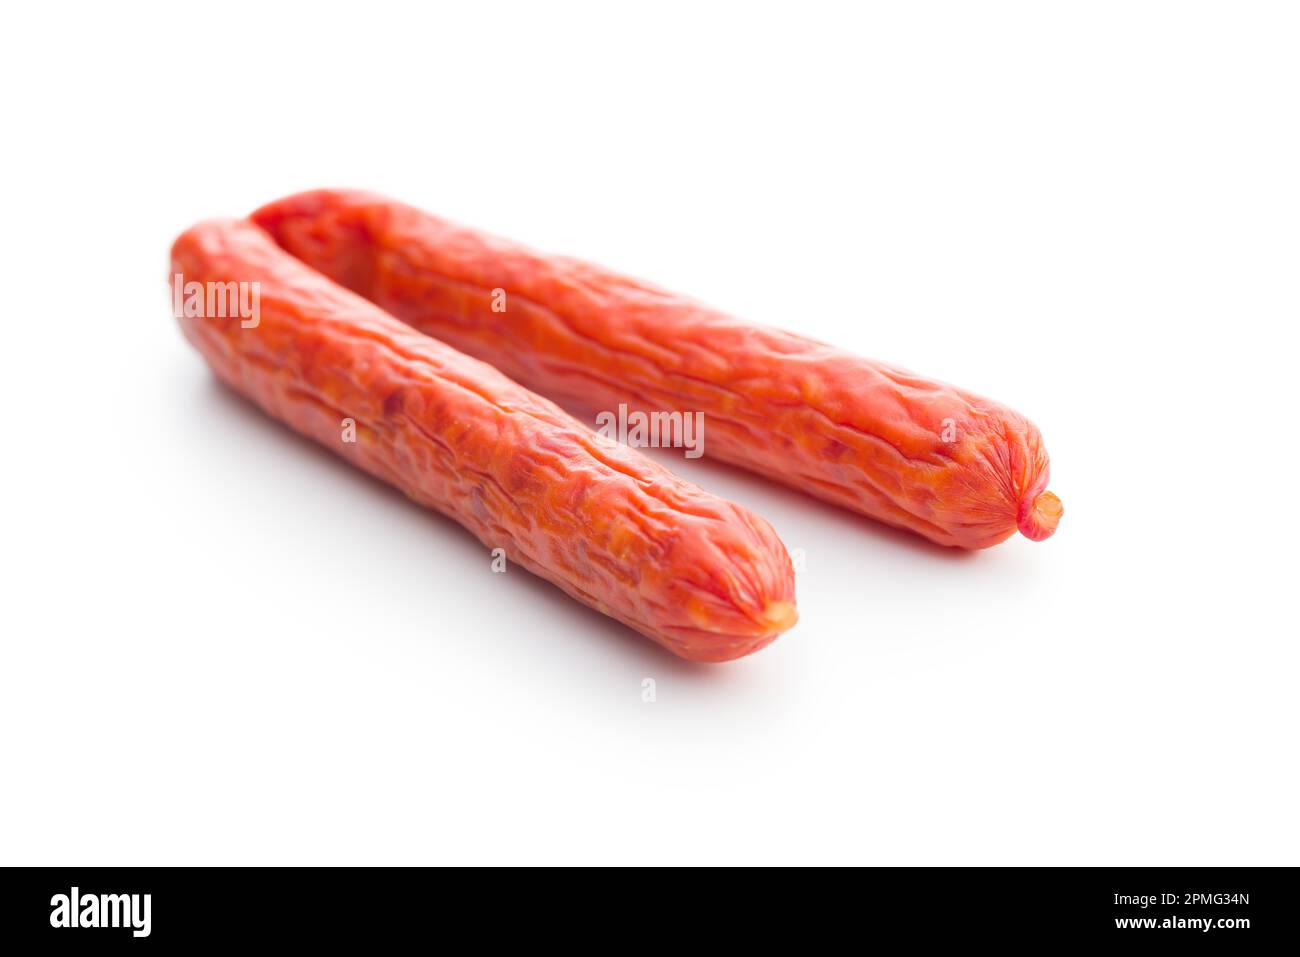 Tasty sausages. Frankfurters isolated on the white background. Stock Photo